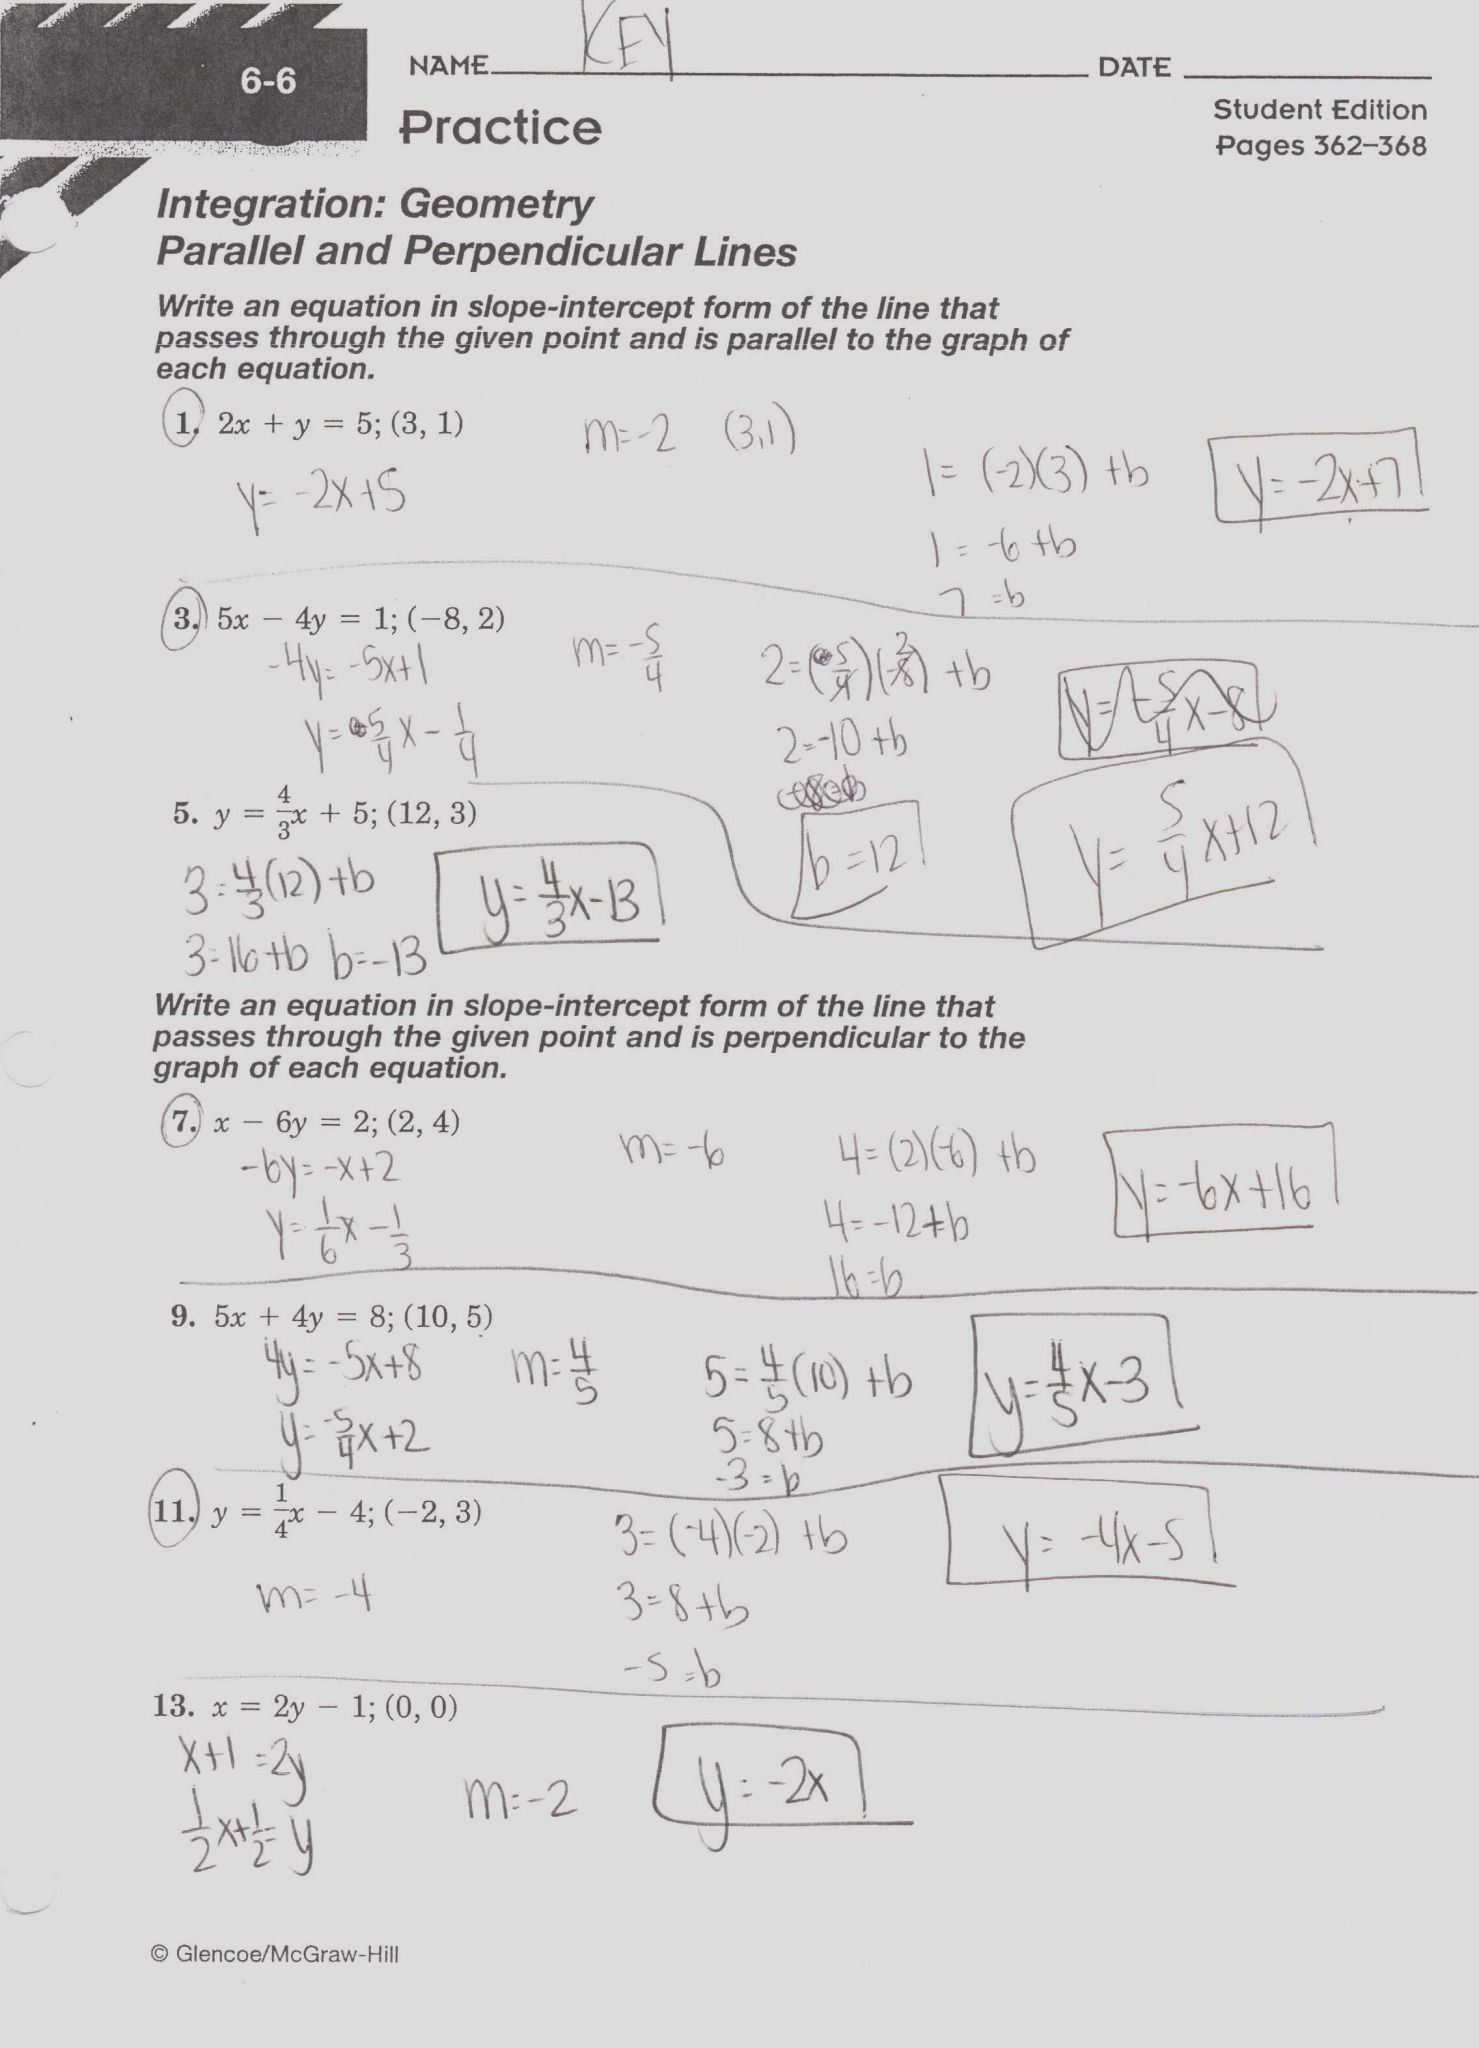 Systems Of Linear Inequalities Worksheet together with Writing Equations Worksheet with Answers Fresh Elegant Writing